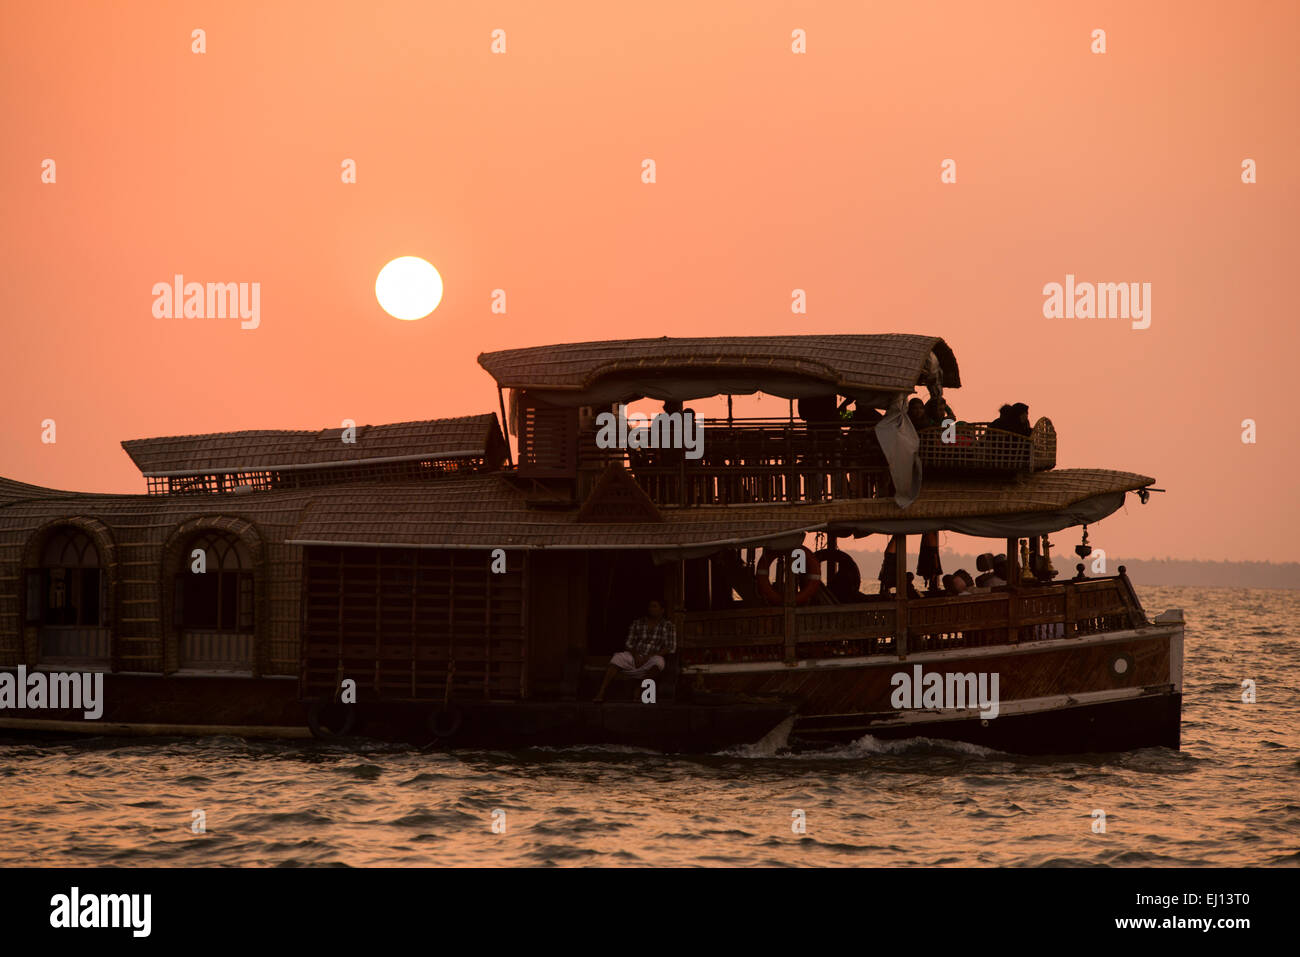 A houseboat in silhouette at sunset on the Vembanad Lake in Kumarakom, Kerala India Stock Photo